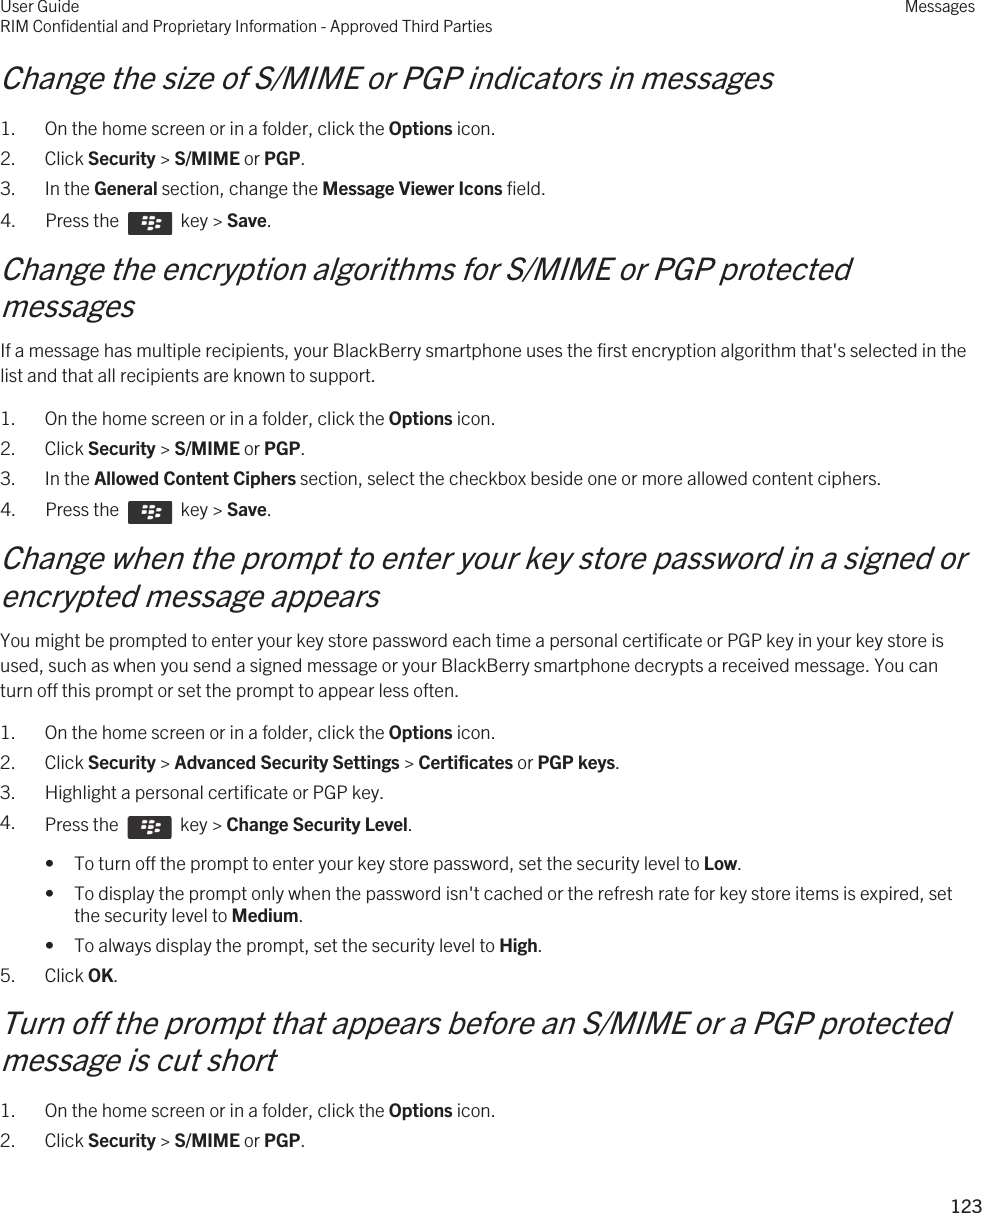 Change the size of S/MIME or PGP indicators in messages1. On the home screen or in a folder, click the Options icon.2. Click Security &gt; S/MIME or PGP.3. In the General section, change the Message Viewer Icons field.4.  Press the    key &gt; Save. Change the encryption algorithms for S/MIME or PGP protected messagesIf a message has multiple recipients, your BlackBerry smartphone uses the first encryption algorithm that&apos;s selected in the list and that all recipients are known to support.1. On the home screen or in a folder, click the Options icon.2. Click Security &gt; S/MIME or PGP.3. In the Allowed Content Ciphers section, select the checkbox beside one or more allowed content ciphers.4.  Press the    key &gt; Save. Change when the prompt to enter your key store password in a signed or encrypted message appearsYou might be prompted to enter your key store password each time a personal certificate or PGP key in your key store is used, such as when you send a signed message or your BlackBerry smartphone decrypts a received message. You can turn off this prompt or set the prompt to appear less often.1. On the home screen or in a folder, click the Options icon.2. Click Security &gt; Advanced Security Settings &gt; Certificates or PGP keys.3. Highlight a personal certificate or PGP key.4. Press the    key &gt; Change Security Level.• To turn off the prompt to enter your key store password, set the security level to Low.• To display the prompt only when the password isn&apos;t cached or the refresh rate for key store items is expired, set the security level to Medium.• To always display the prompt, set the security level to High.5. Click OK.Turn off the prompt that appears before an S/MIME or a PGP protected message is cut short1. On the home screen or in a folder, click the Options icon.2. Click Security &gt; S/MIME or PGP.User GuideRIM Confidential and Proprietary Information - Approved Third PartiesMessages123 